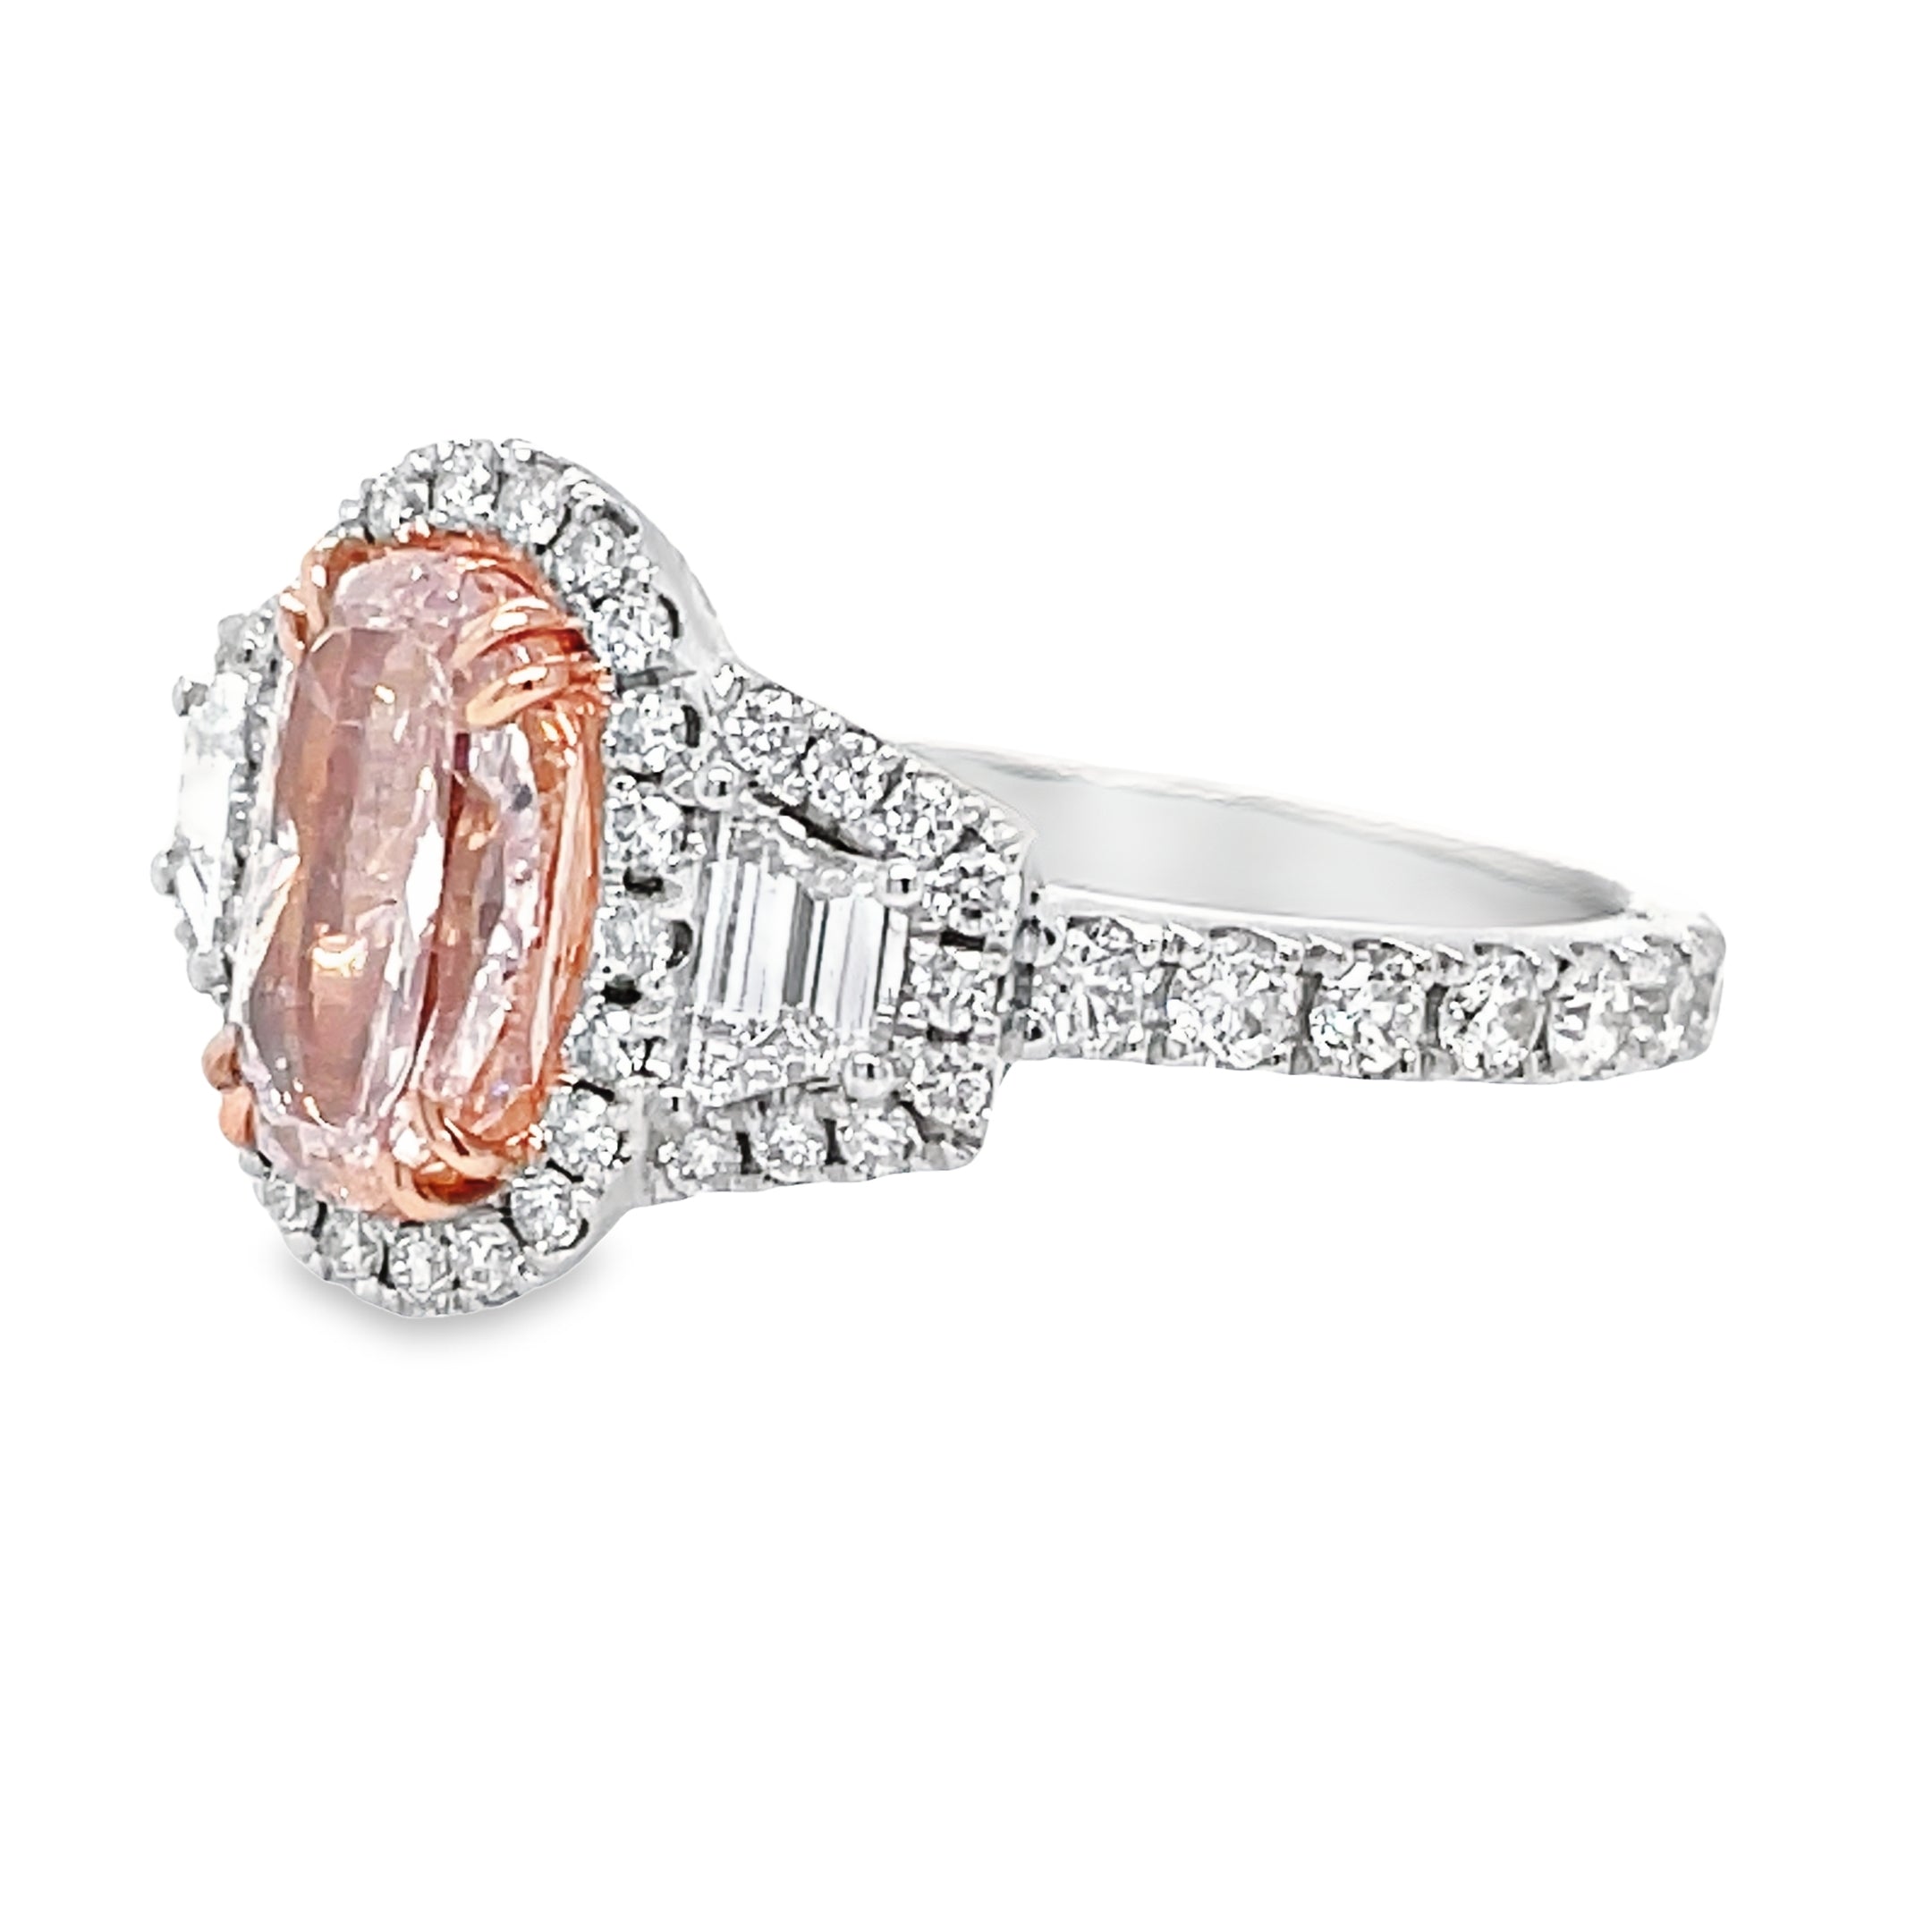 "Indulge in the rare beauty of our GIA certified 1.40 carat oval shaped pink diamond engagement ring. With two kite shaped diamonds and a round diamond bezel totaling 0.90 carats, this 18k white gold ring radiates sophistication and luxury. Make every moment sparkle with this stunning, one-of-a-kind piece."